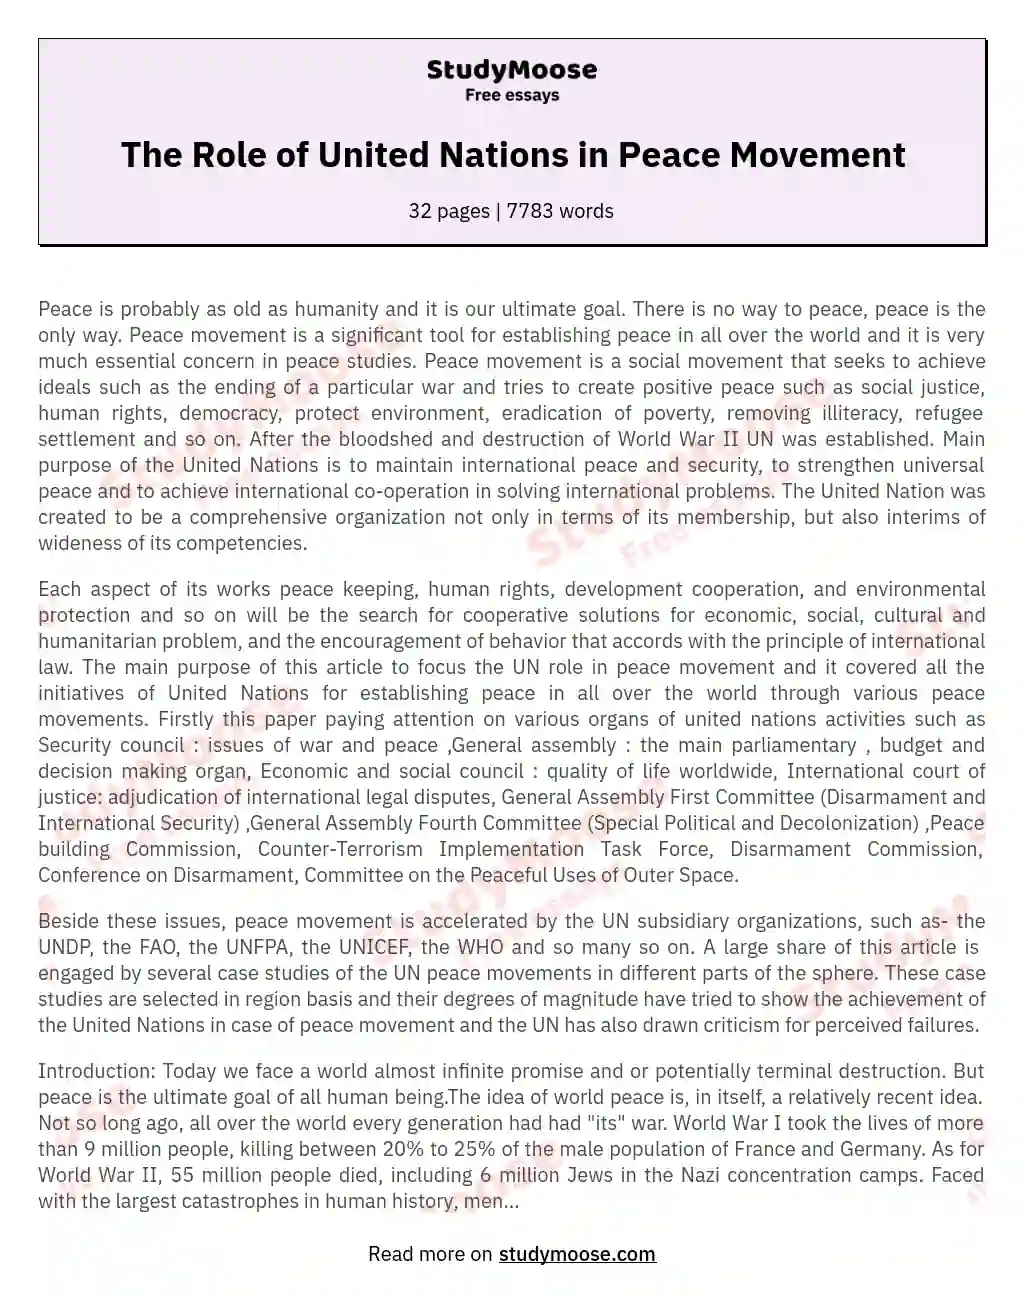 The Role of United Nations in Peace Movement essay